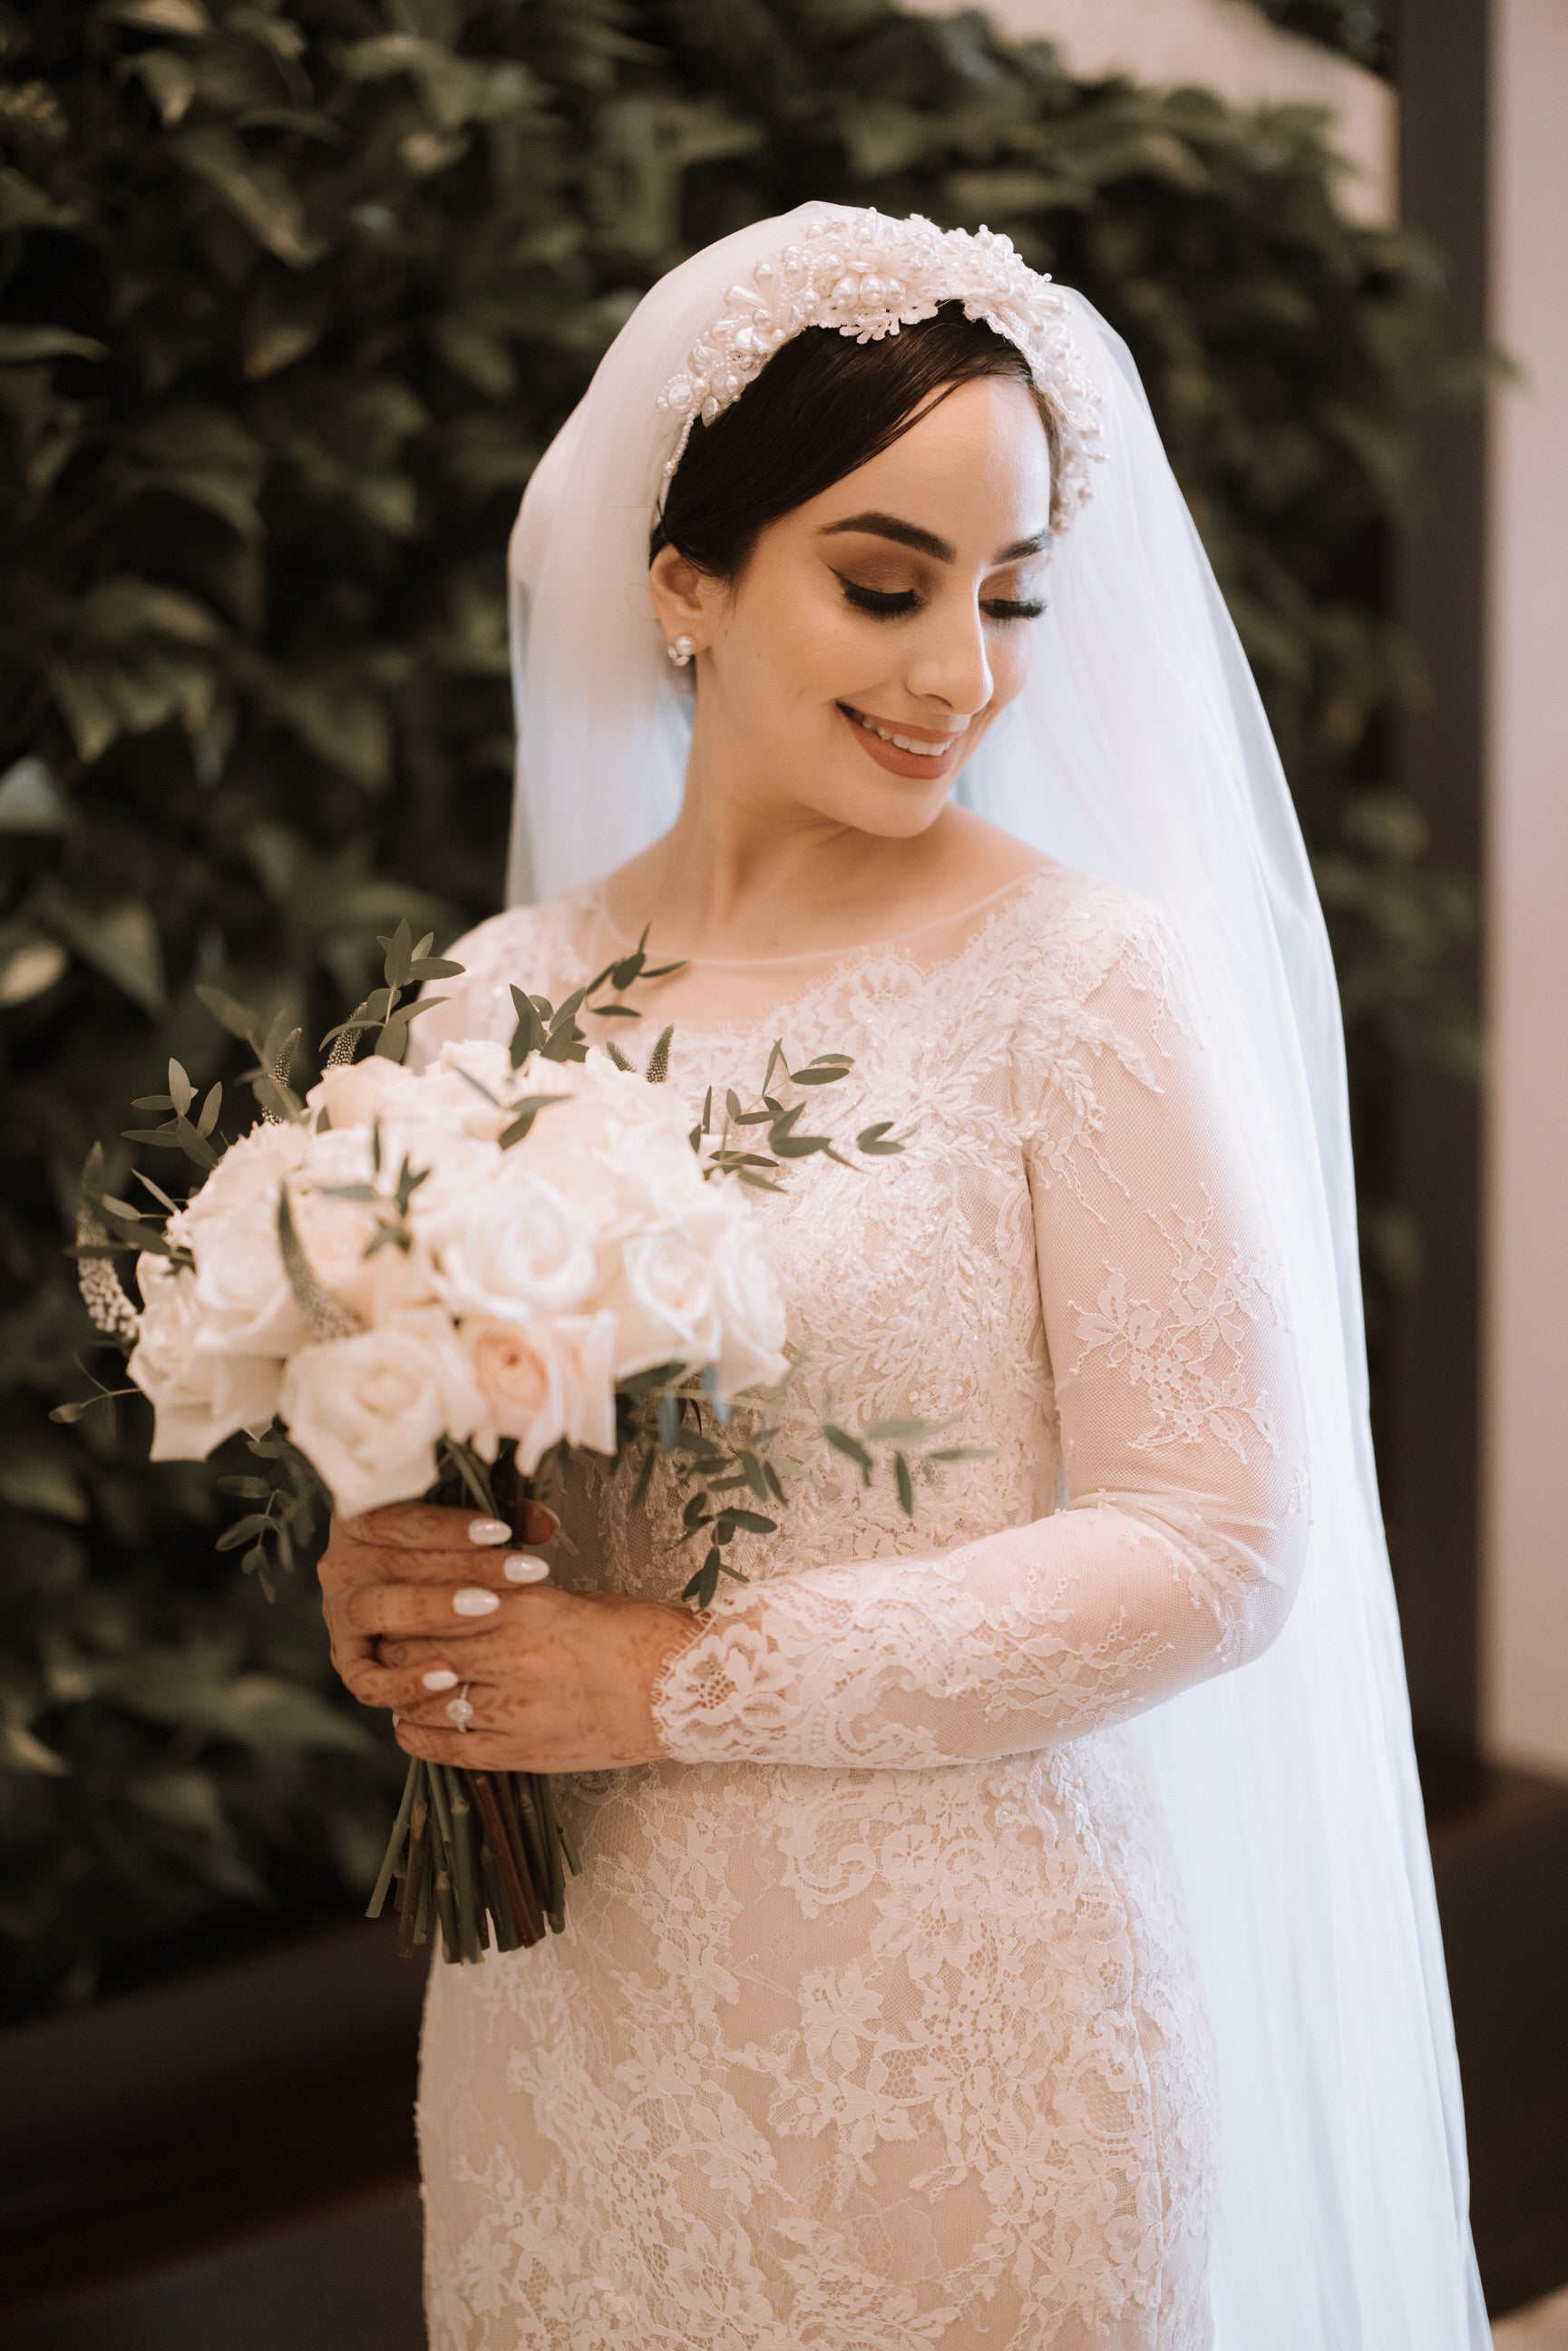 Chic and Modest: Pearl Headband Bridal Veils for Muslim Brides